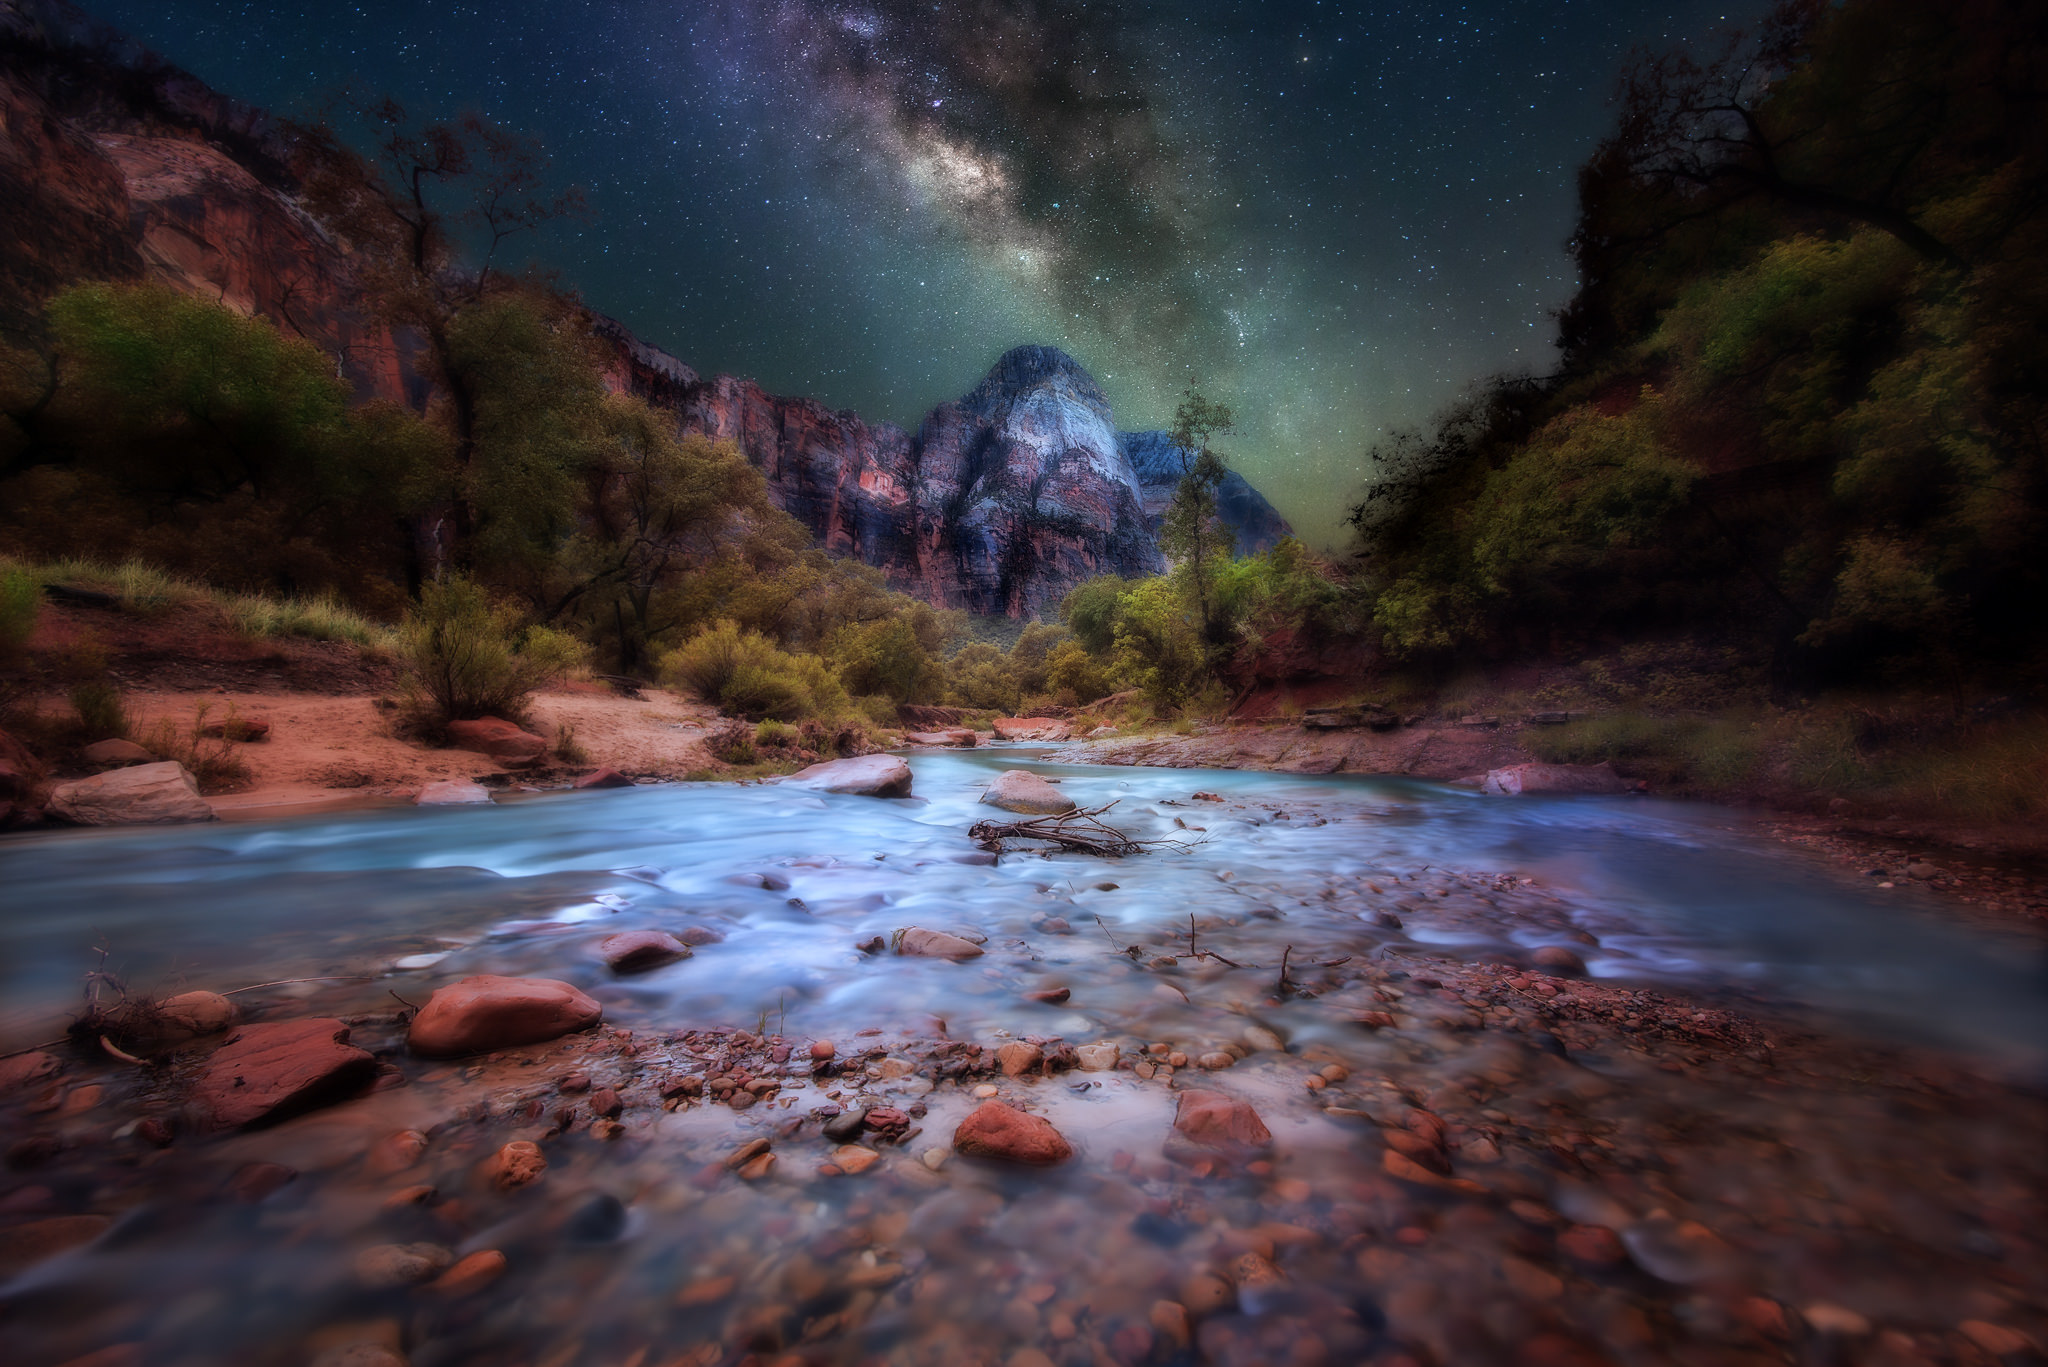 zion national park, earth, cliff, milky way, mountain, nature, night, river, stars, stone, utah, national park 5K